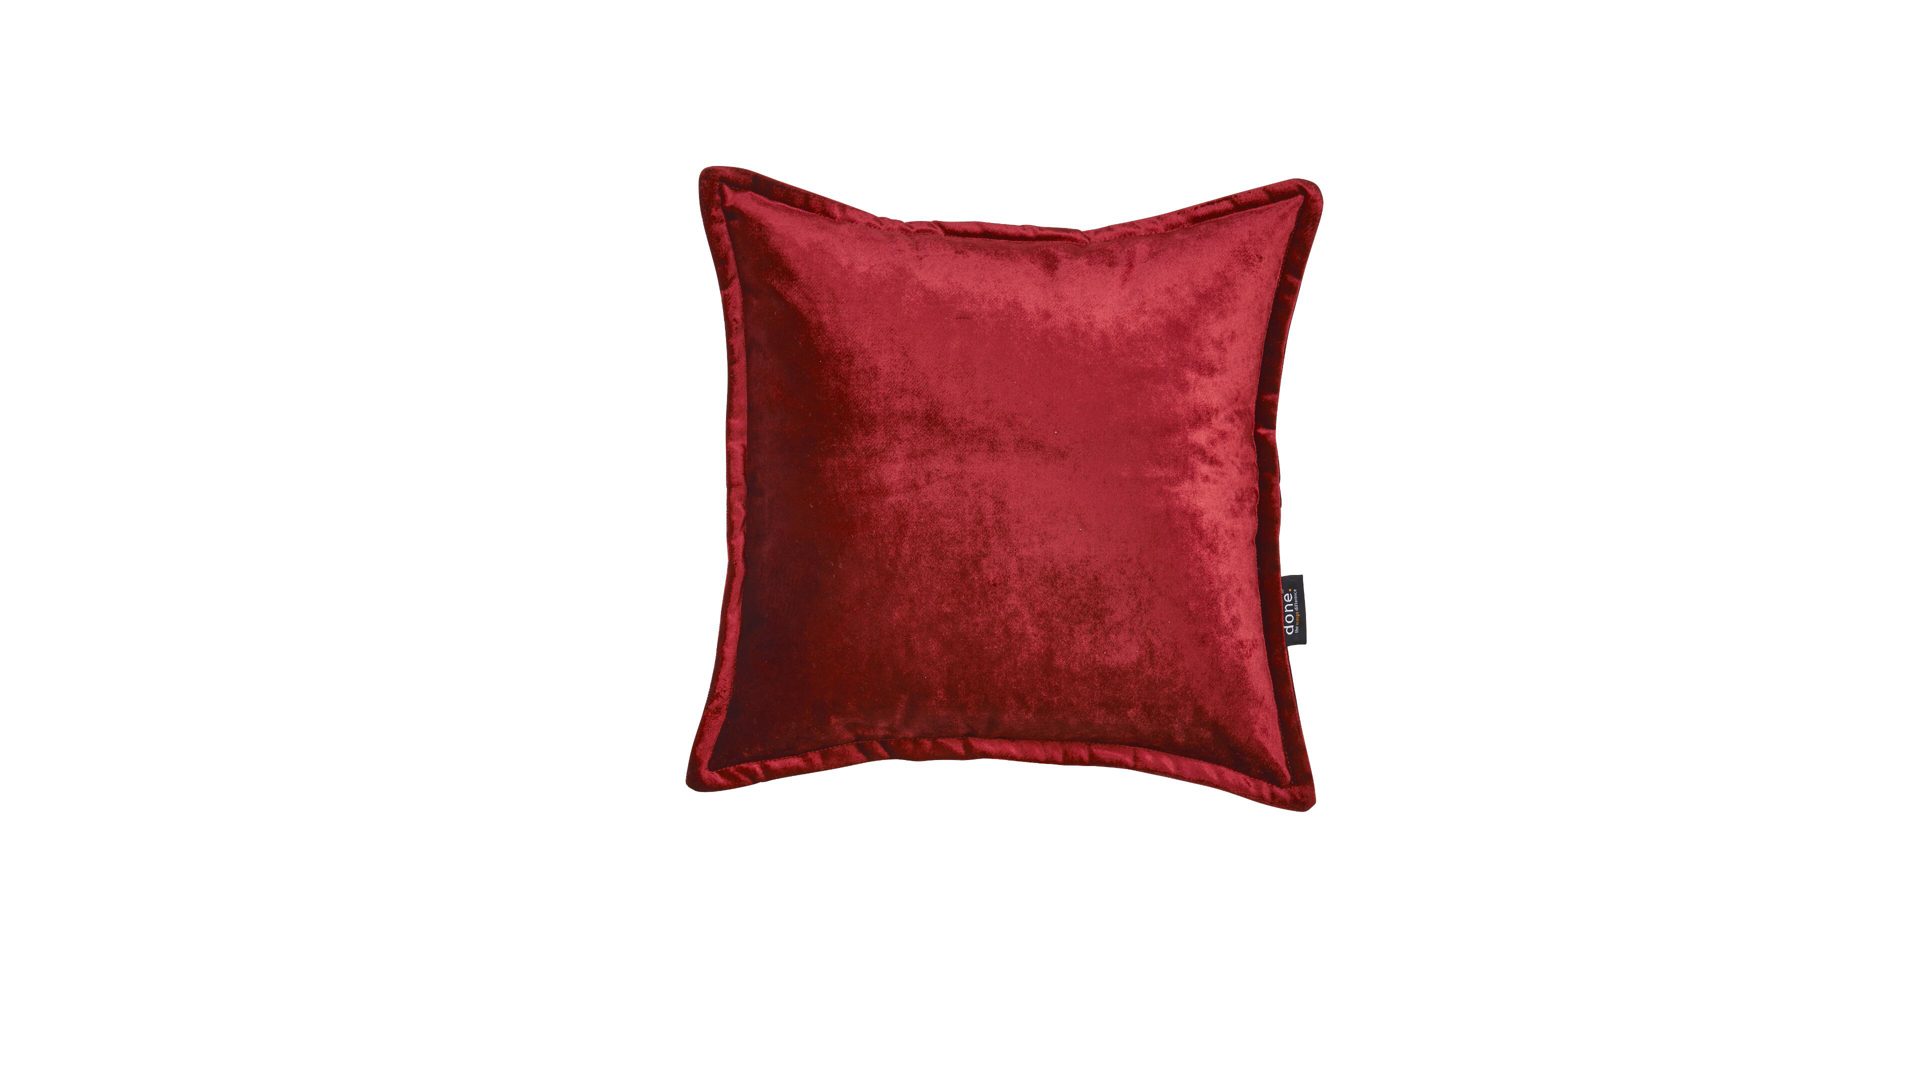 Kissenbezug /-hülle Done.® aus Stoff in Dunkelrot done.® Kissenhülle Cushion Glam roter Samt – ca. 45 x 45 cm